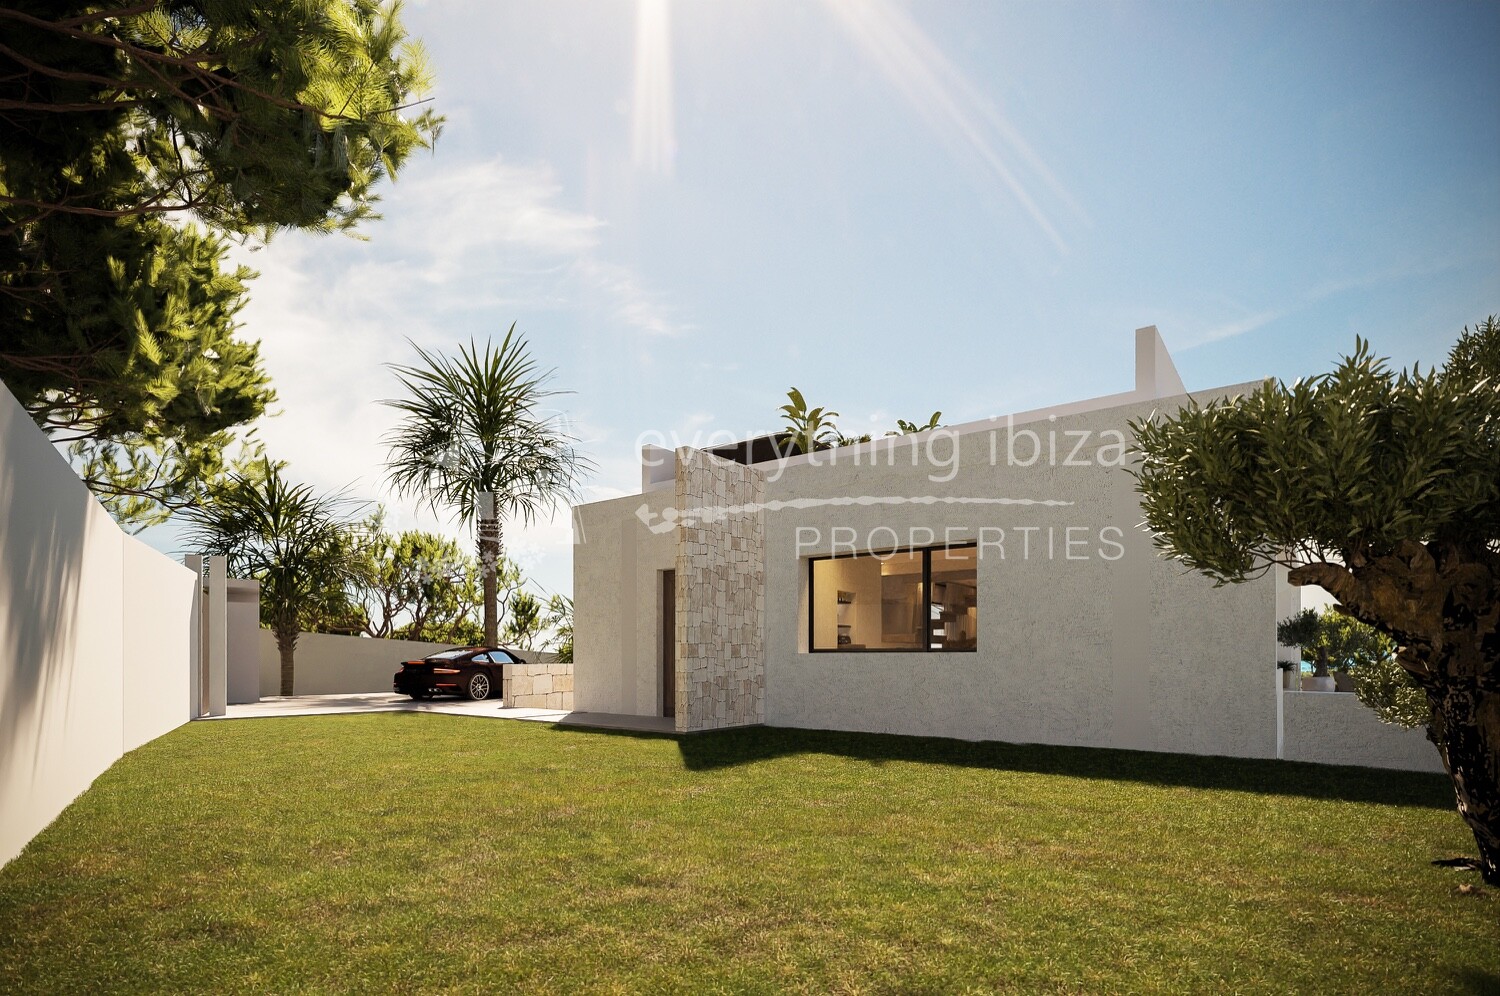 Magnificent Modern Villa in Vista Alegre with Stunning Views, ref. 1501, for sale in Ibiza by everything ibiza Properties